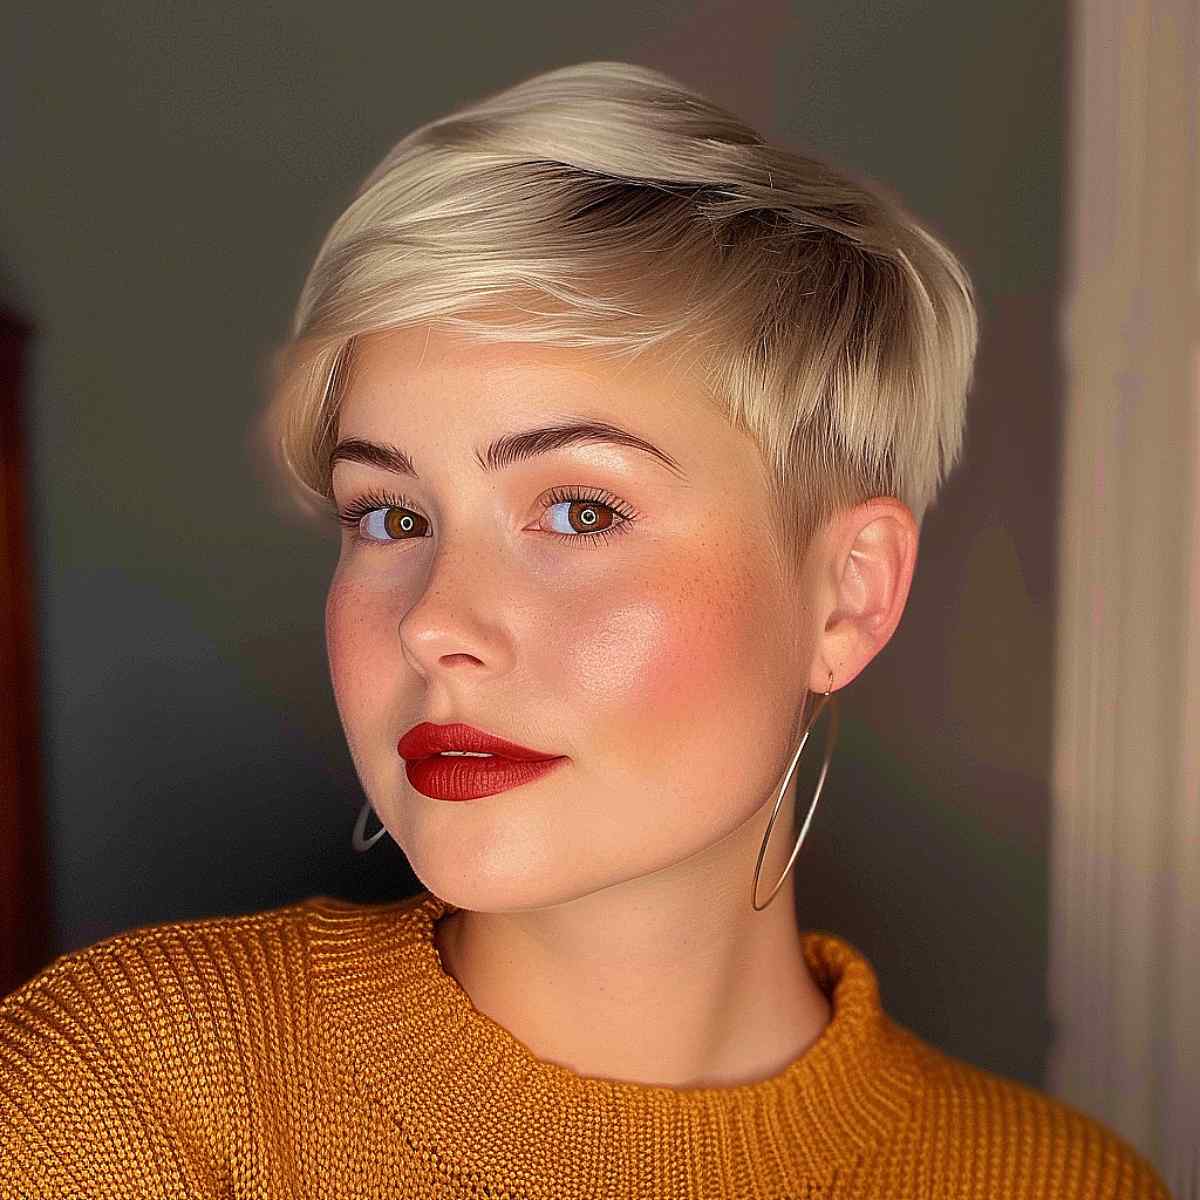 Slimming Pixie Cut for a Round Face Shape